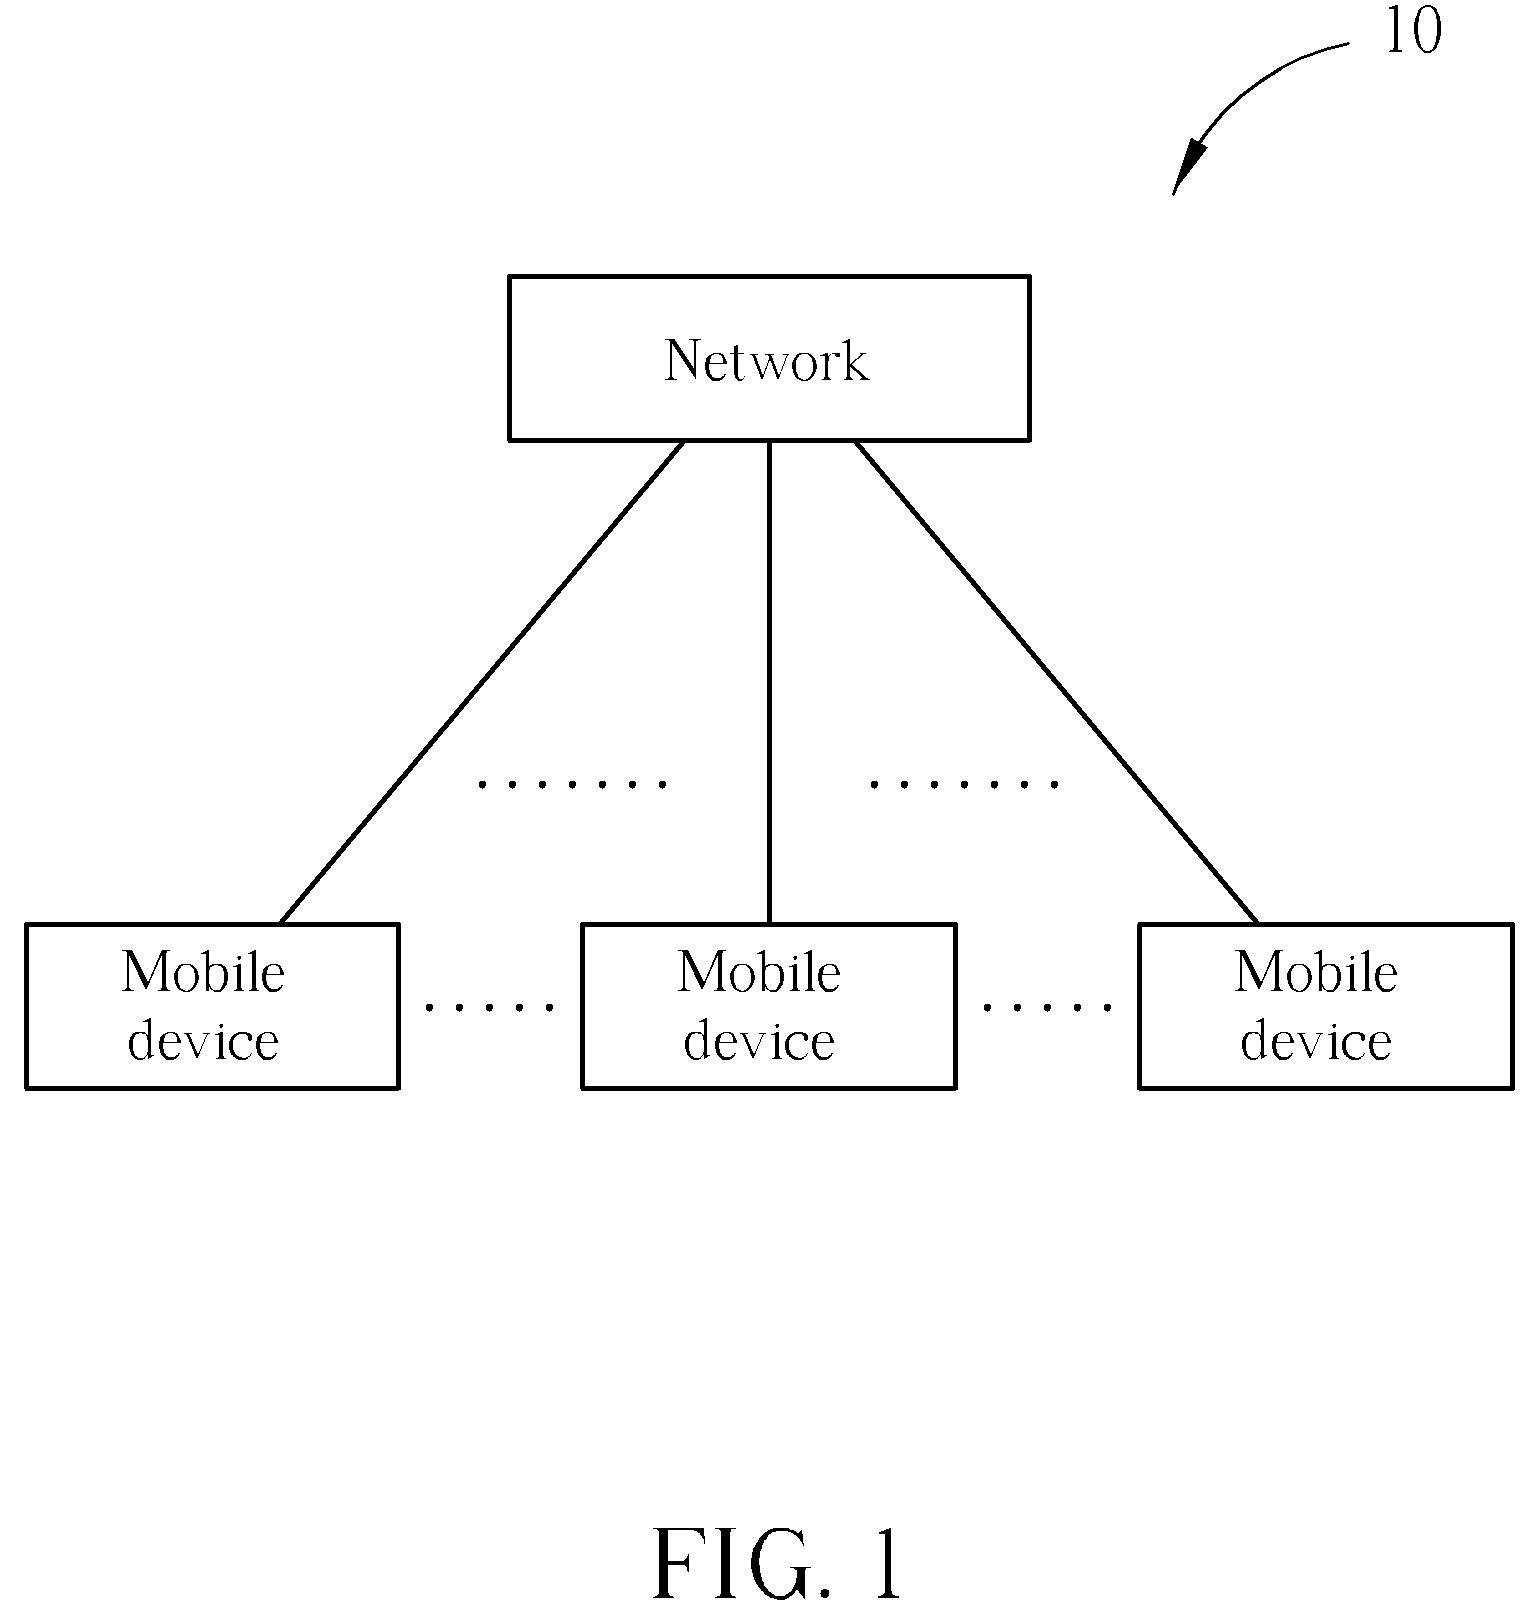 Method for reducing closed subscriber group identity comparison